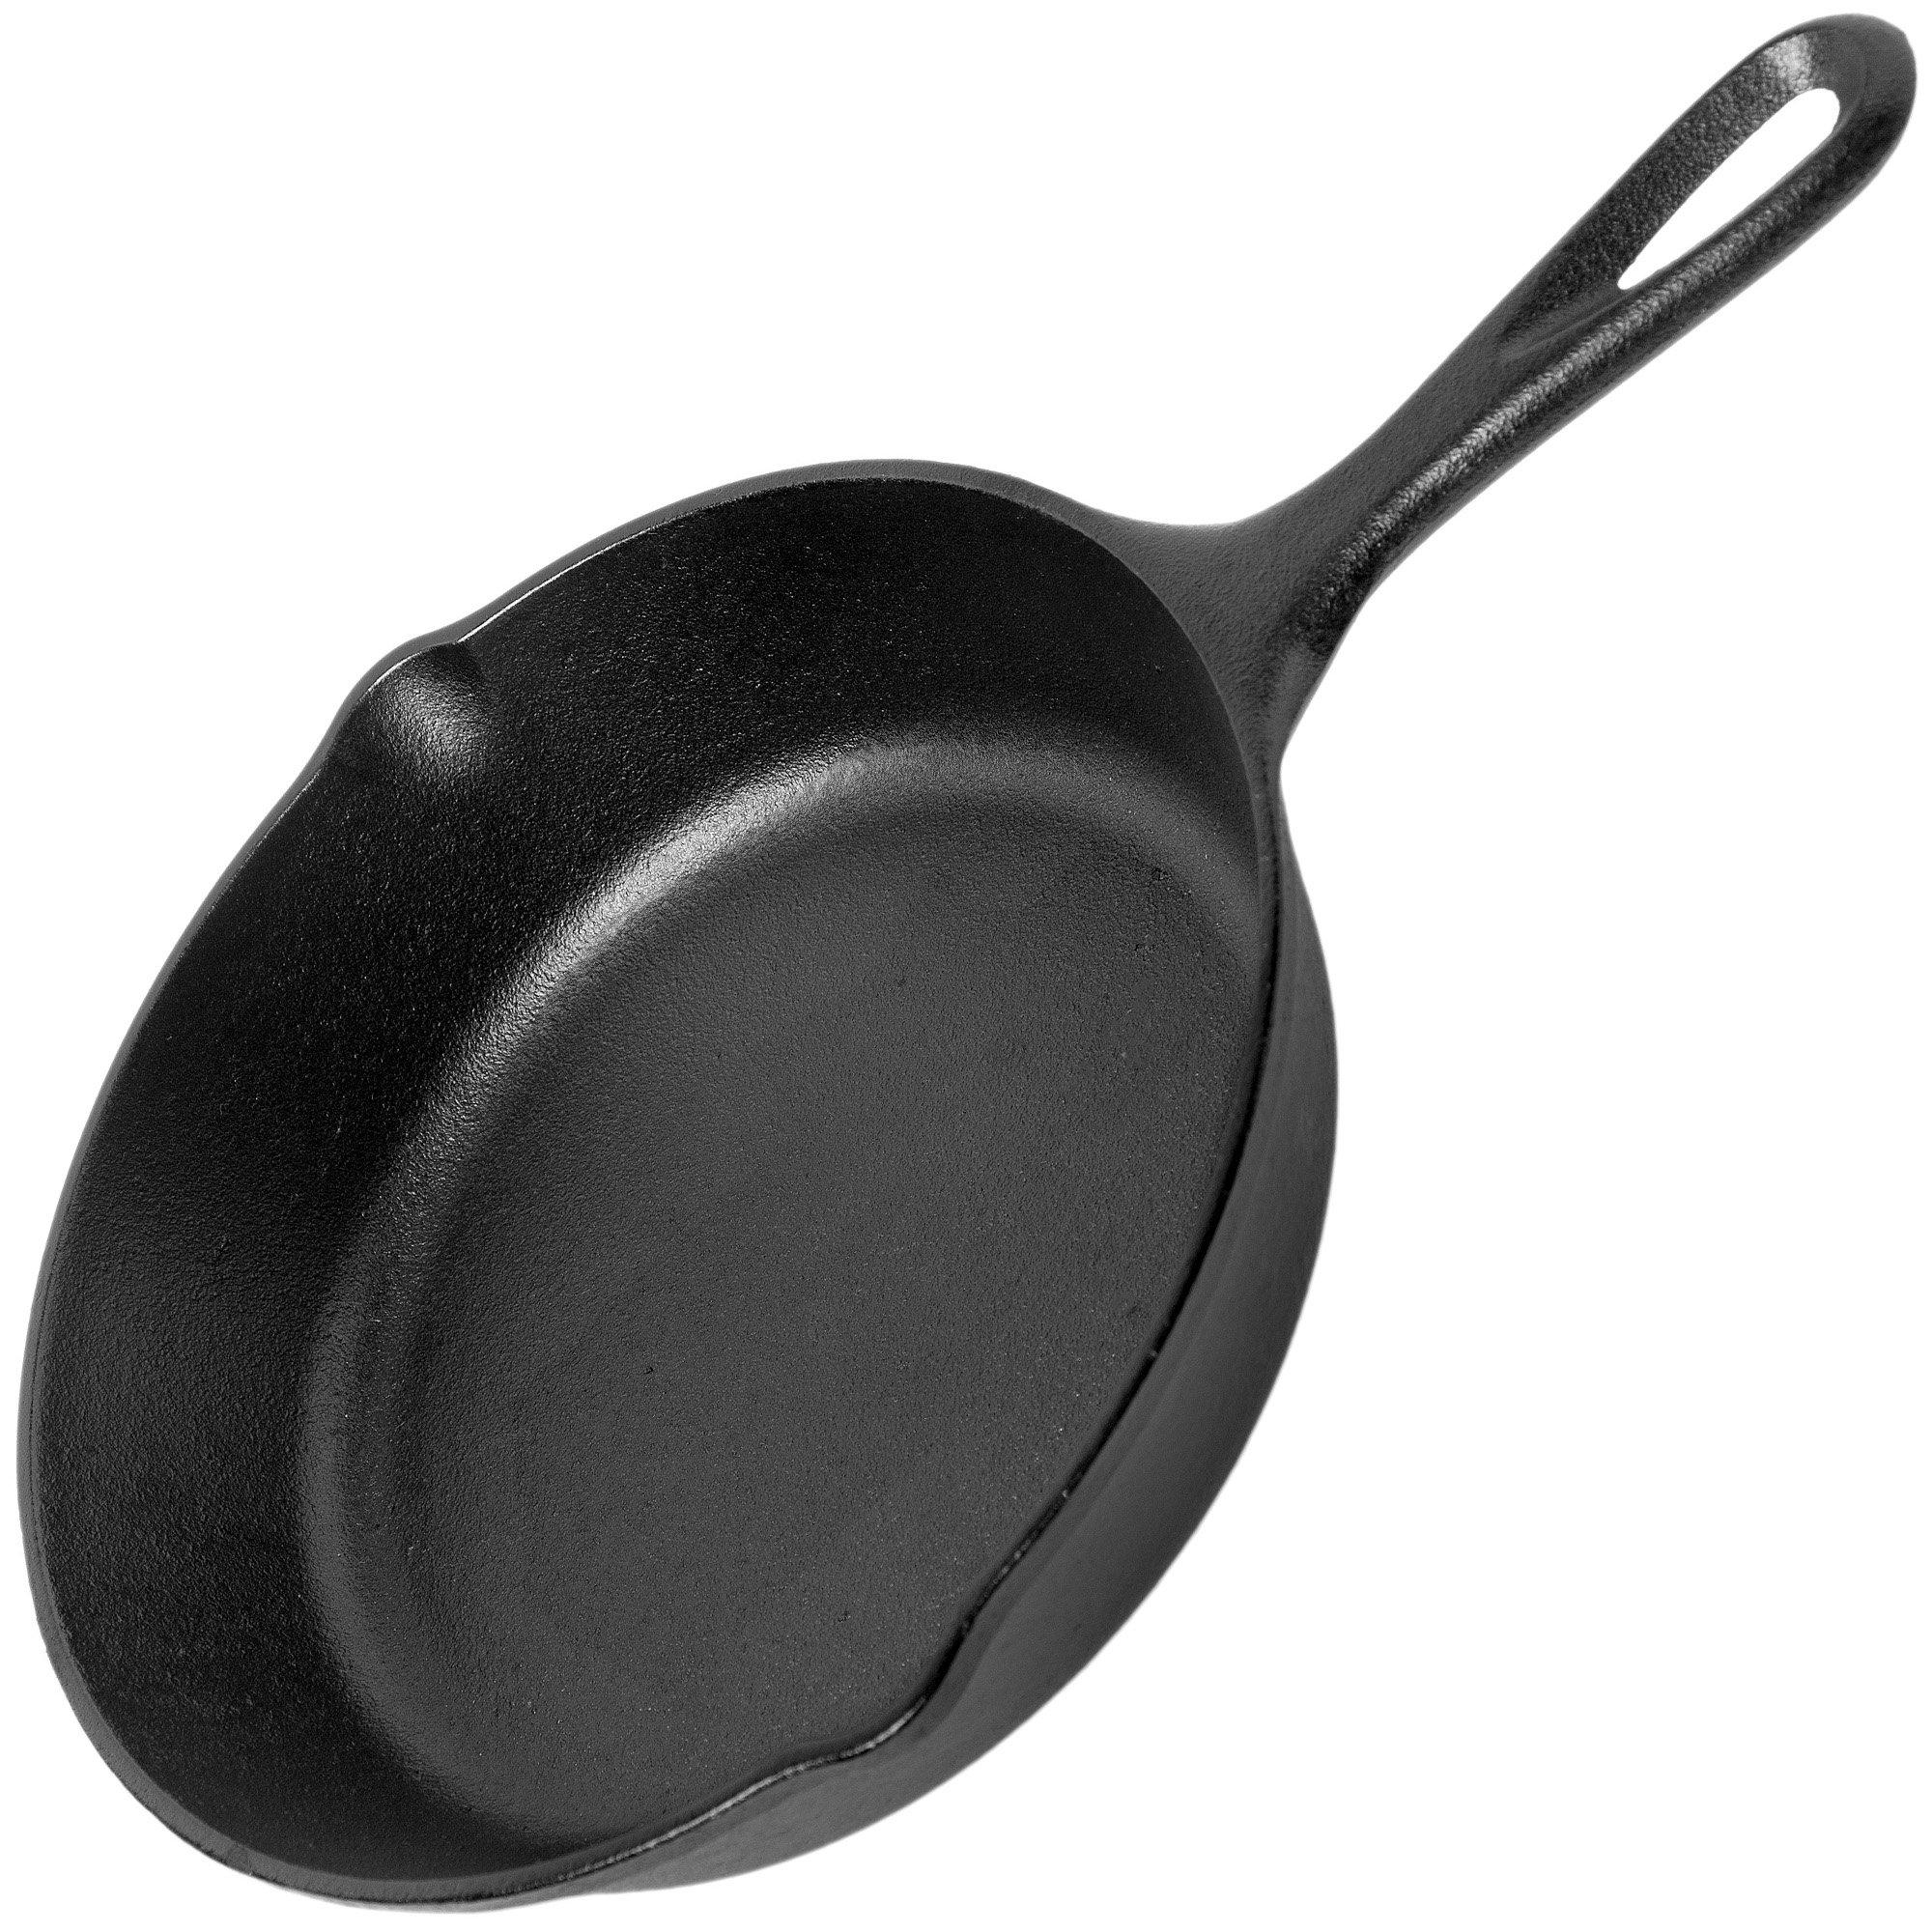 Lodge cast iron skillet 20cm – 8 inches